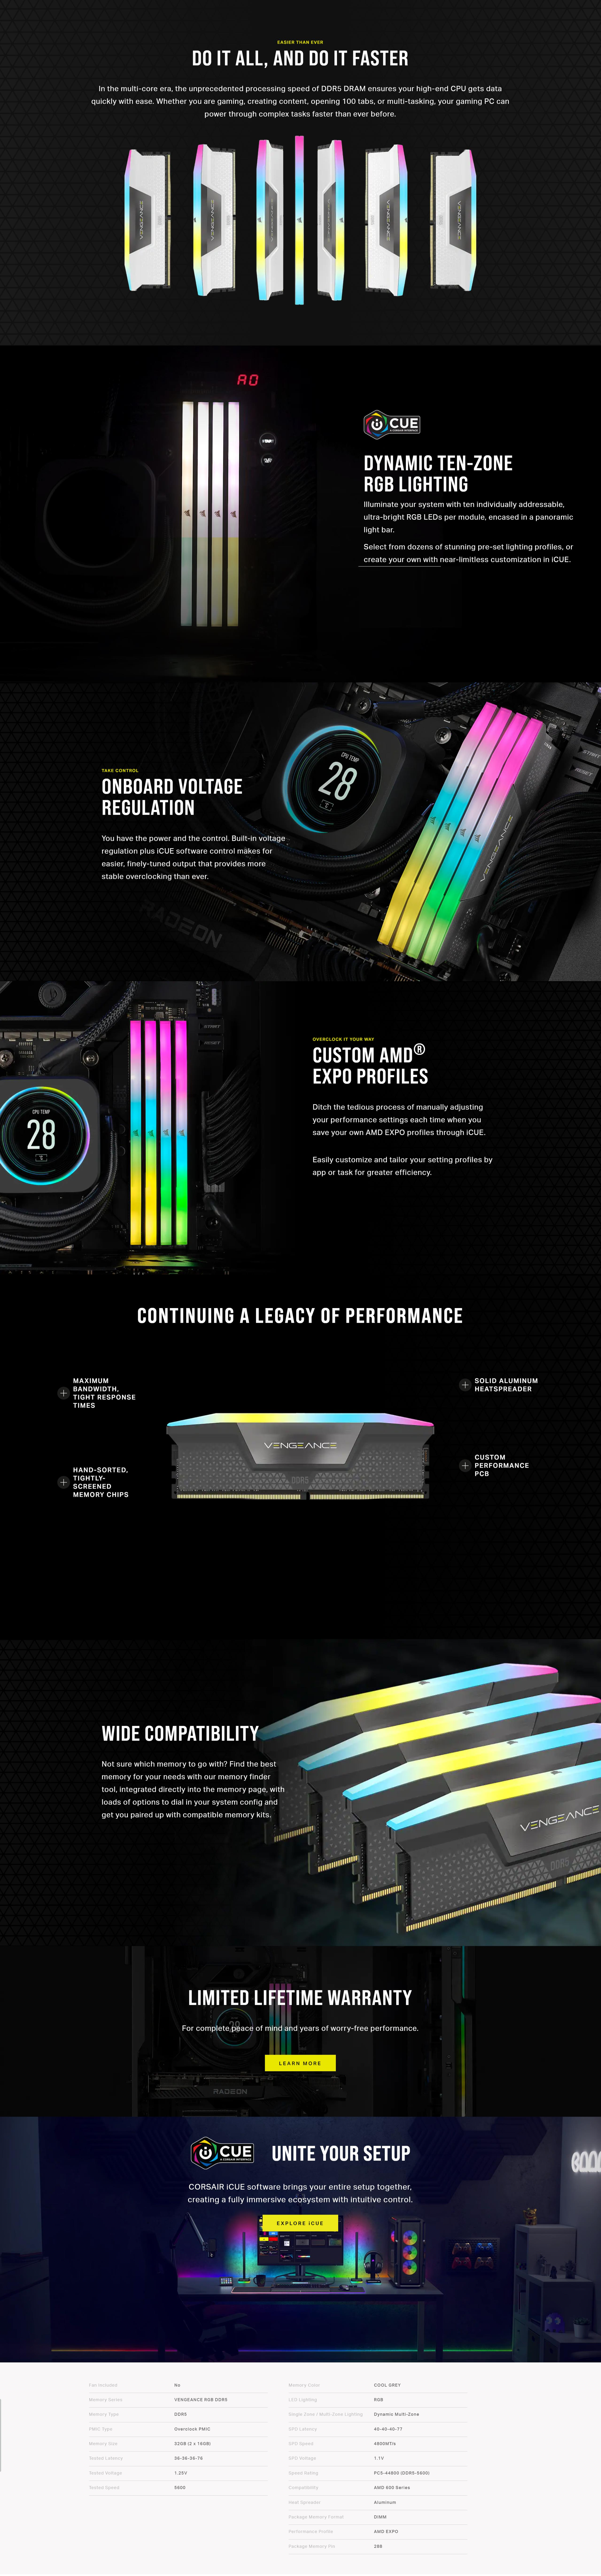 A large marketing image providing additional information about the product Corsair 32GB Kit (2x16GB) DDR5 Vengeance RGB AMD EXPO C36 5600MT/s - Cool Grey - Additional alt info not provided